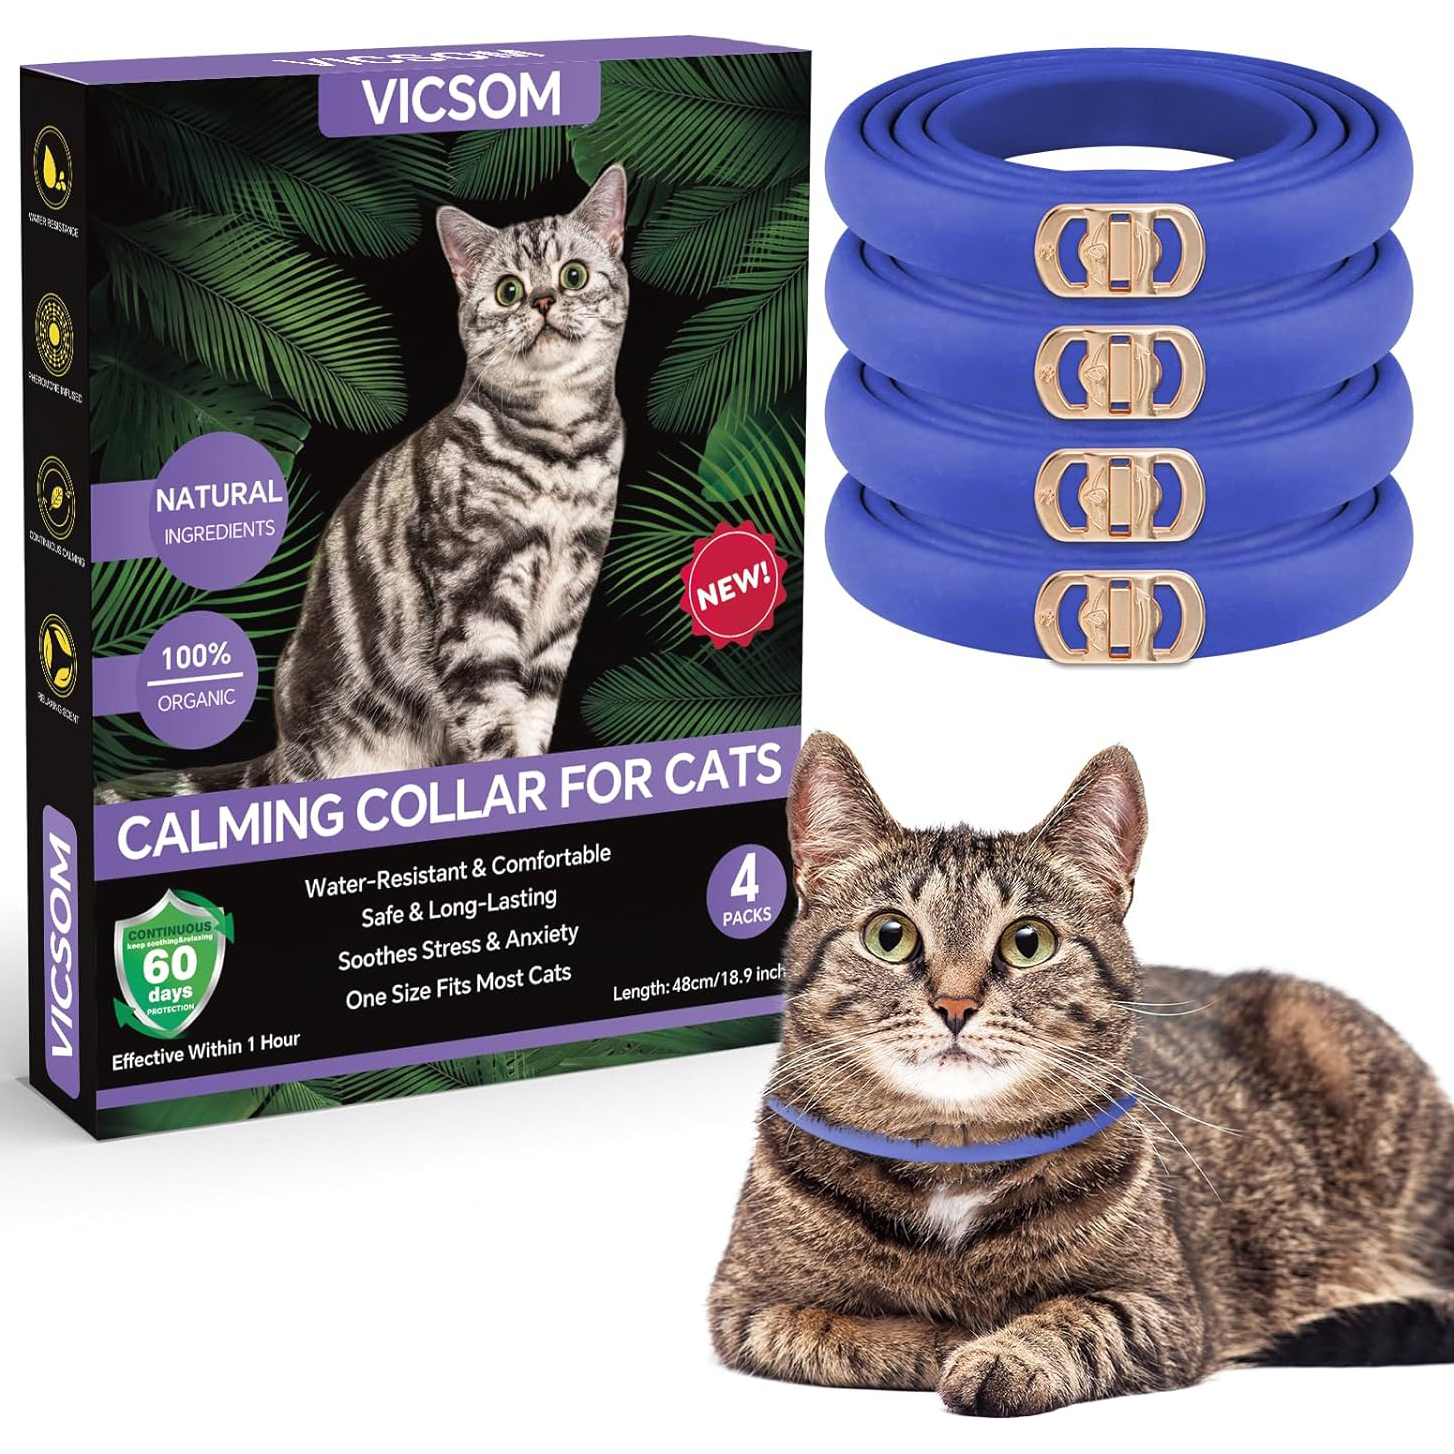 VICSOM Calming Collars for Cats